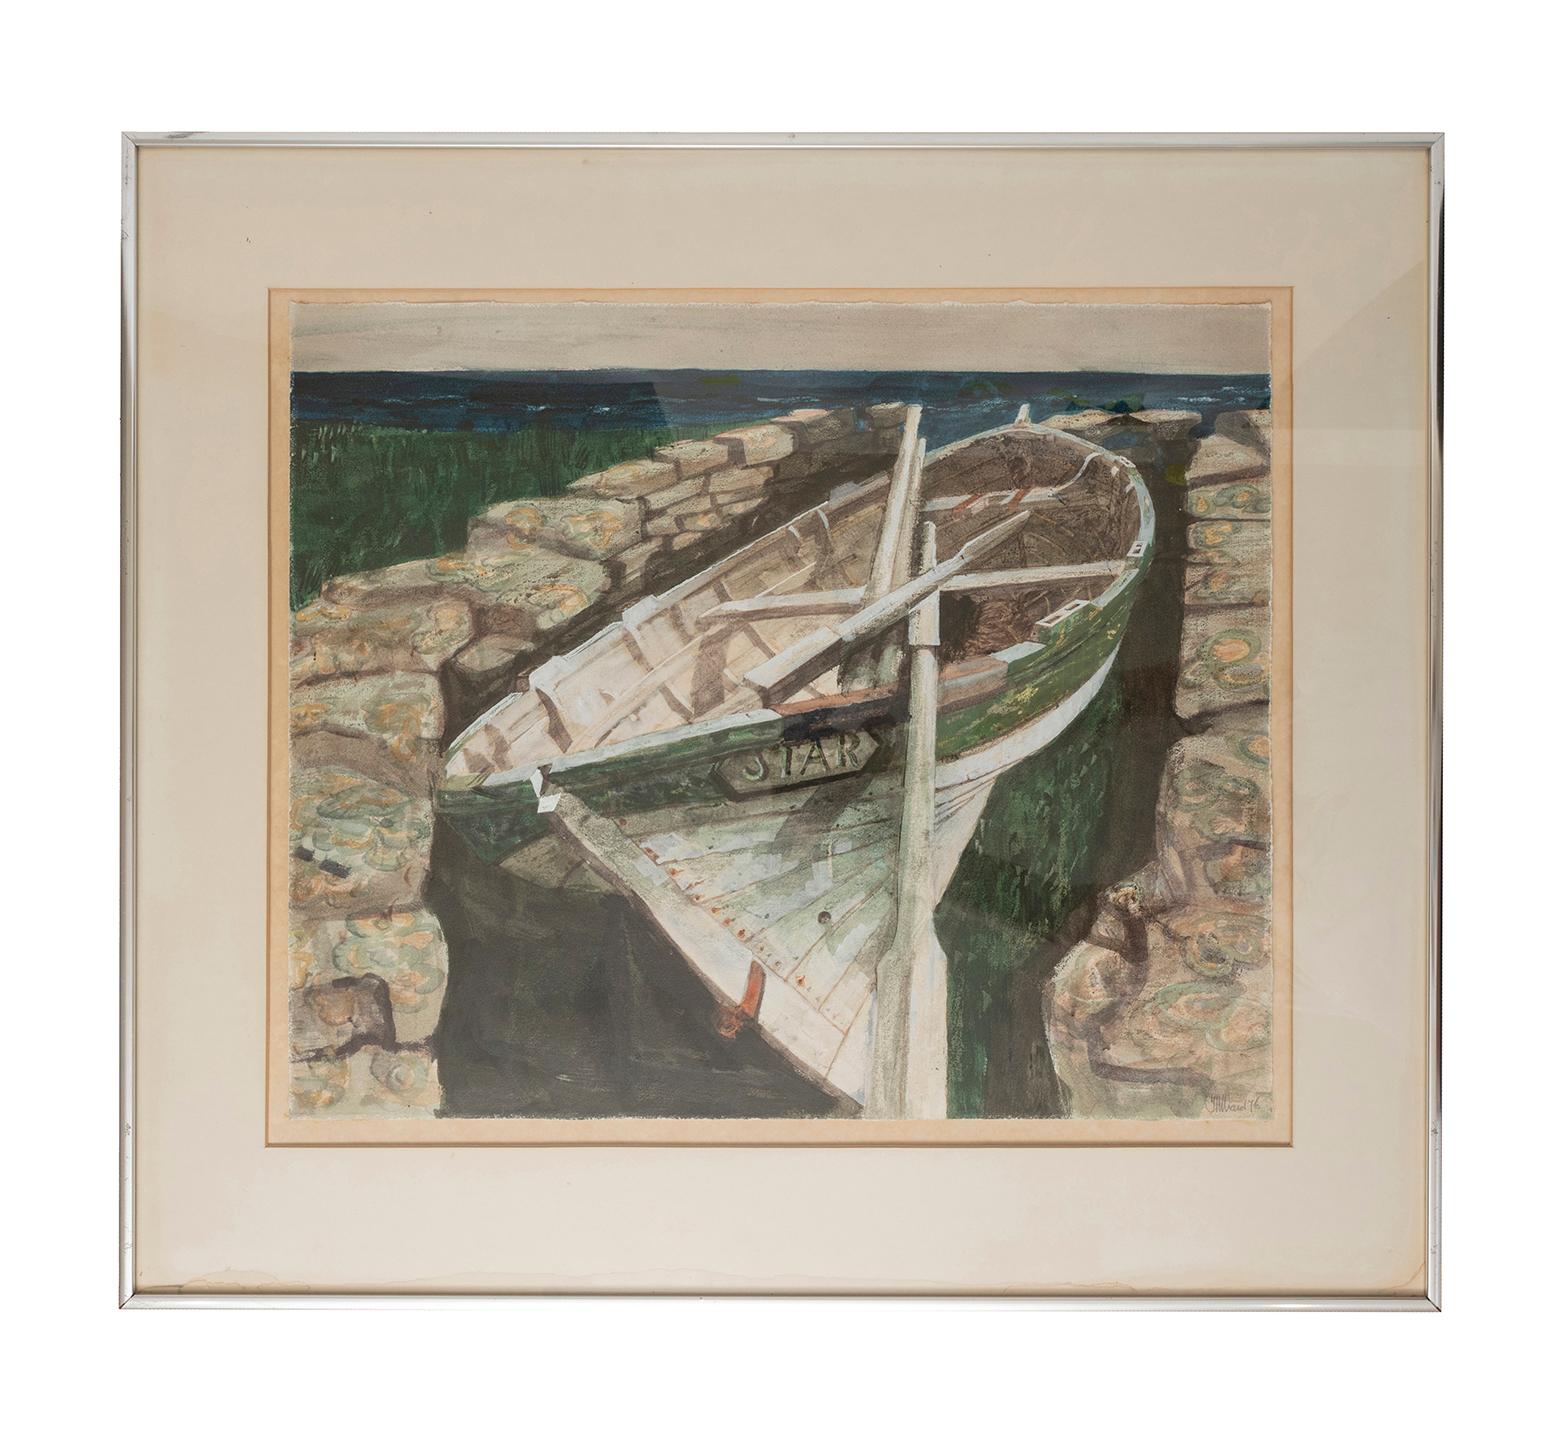 Star 1976, artists name indistinct possibly YHillbarel
Classic wooden fishing skiff in a harbour
Watercolour

Visible sheet 61cm.,24